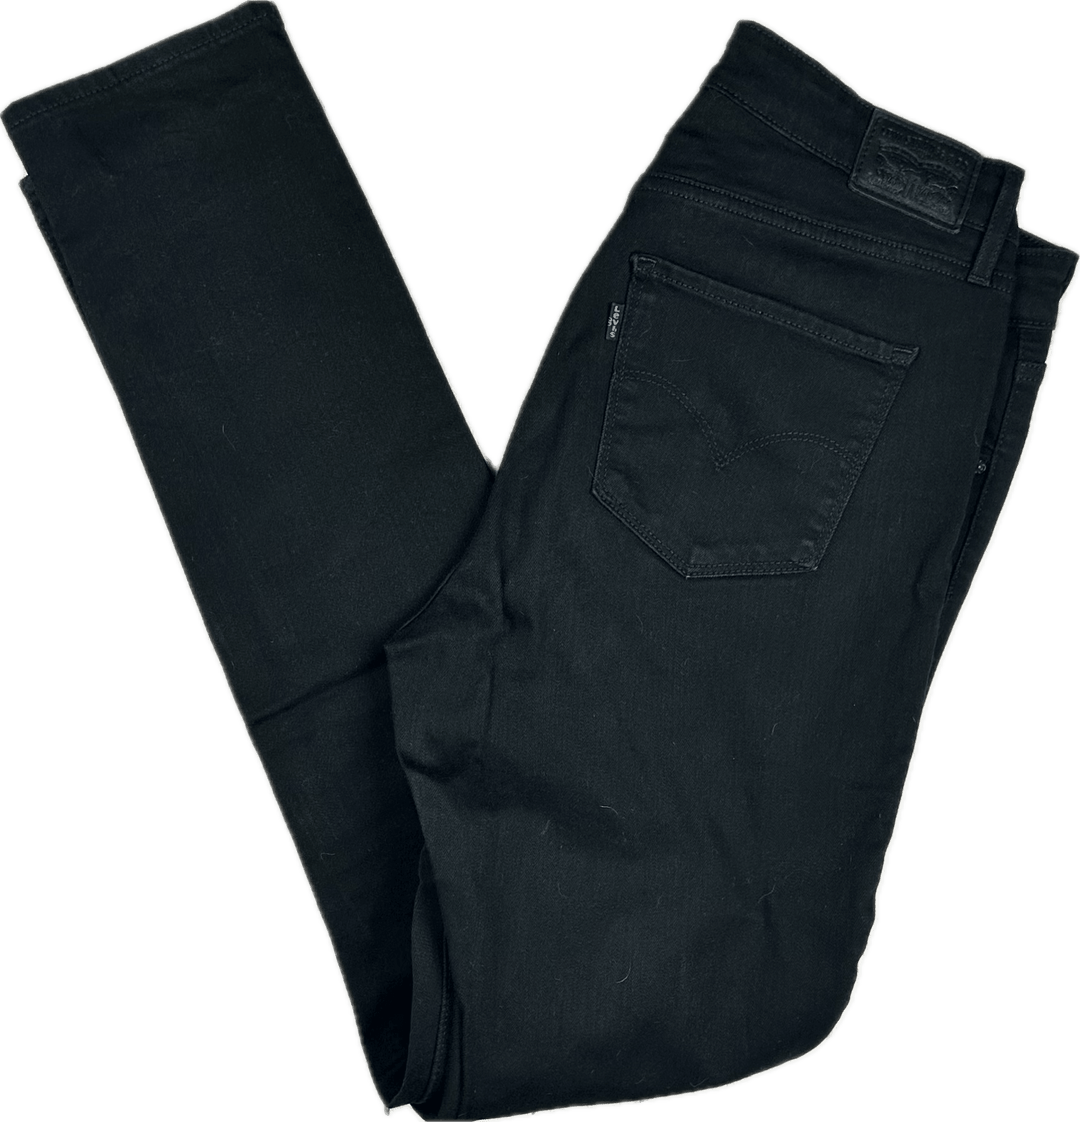 Levis 721 Ladies ' The High Rise Skinny' Black Jeans - Size 31 - Jean Pool